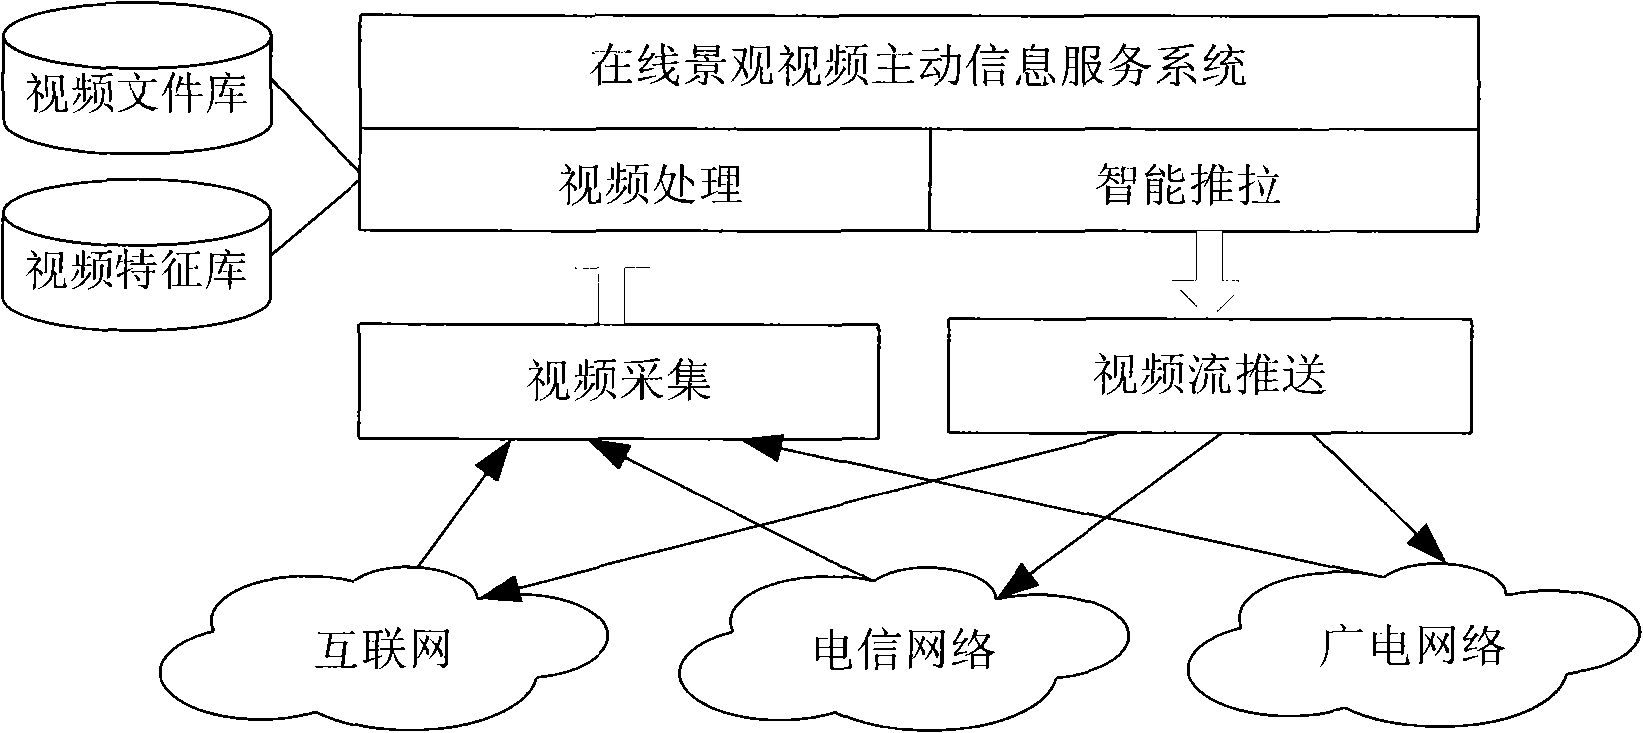 On-line landscape video active information service system of scenic spots in tourist attraction based on bandwidth network